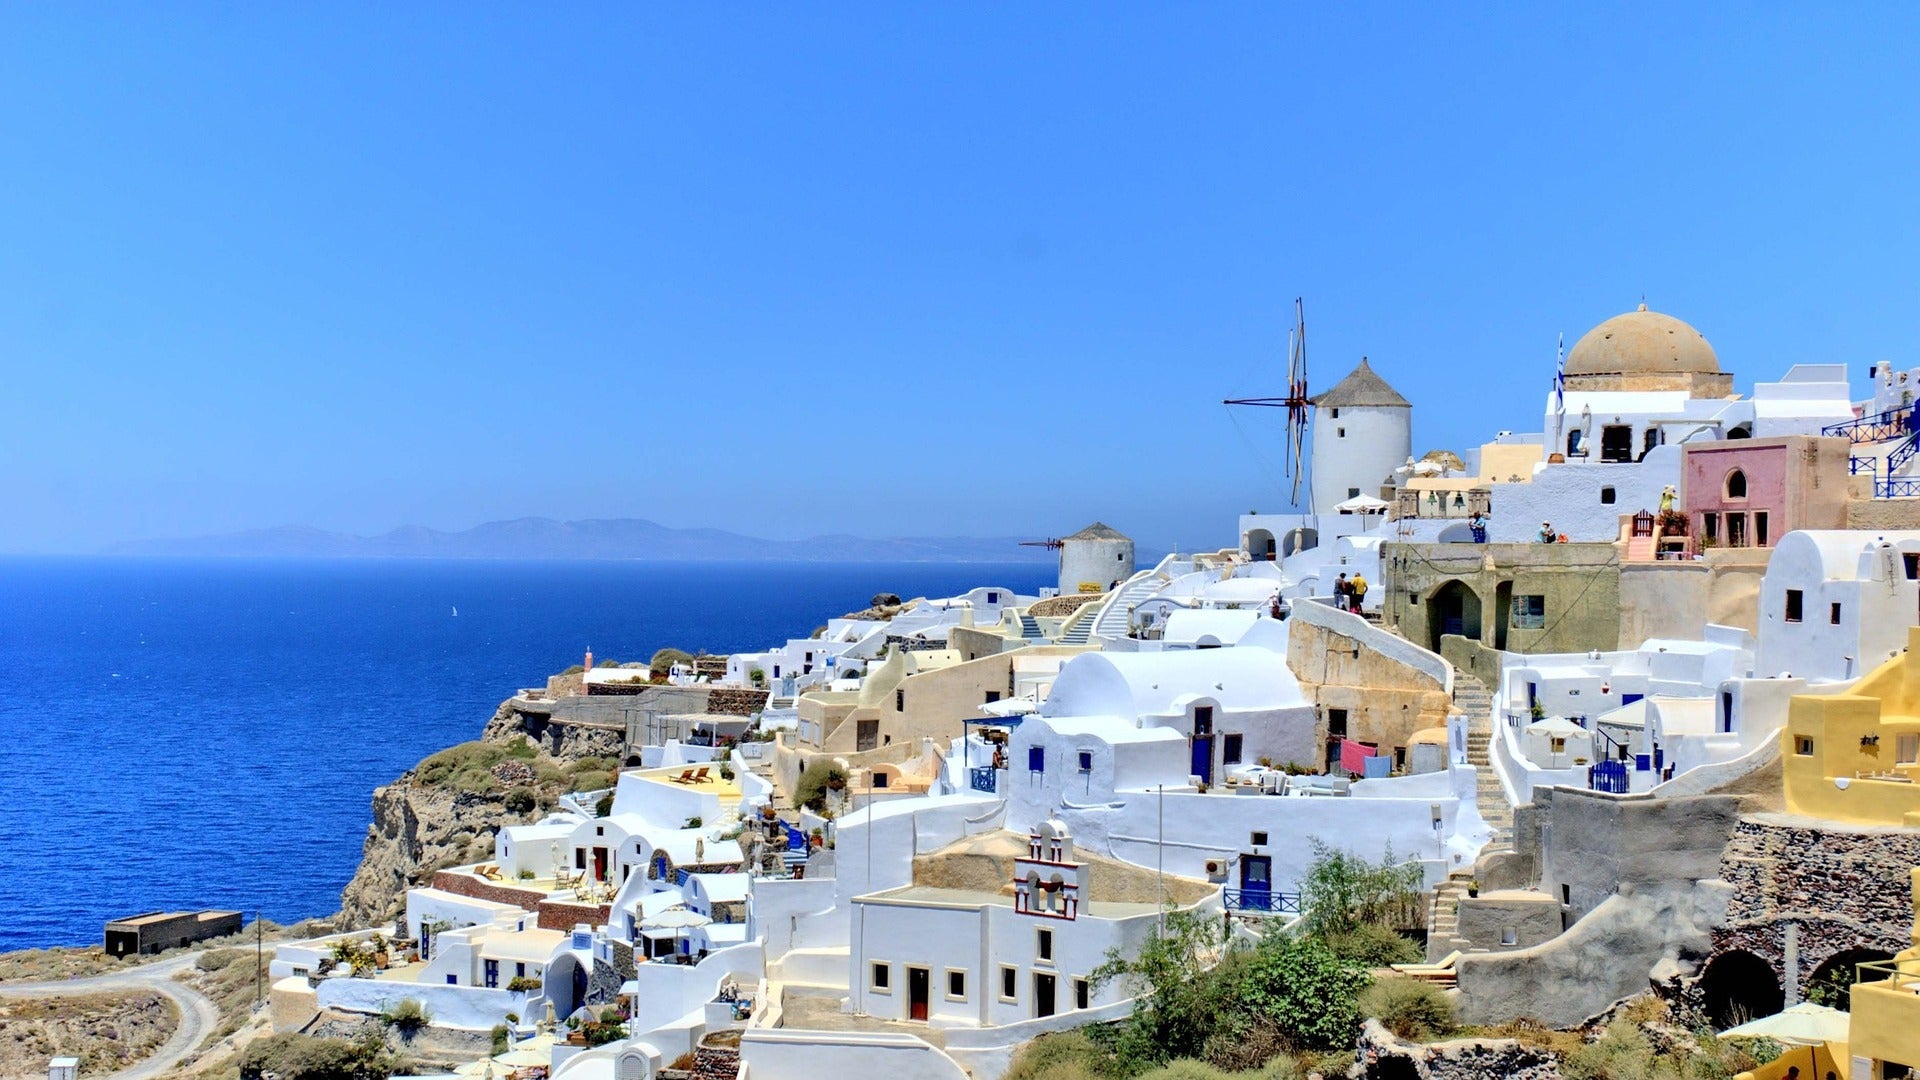 old greek buildings on front of a blue sea as travel target for esim